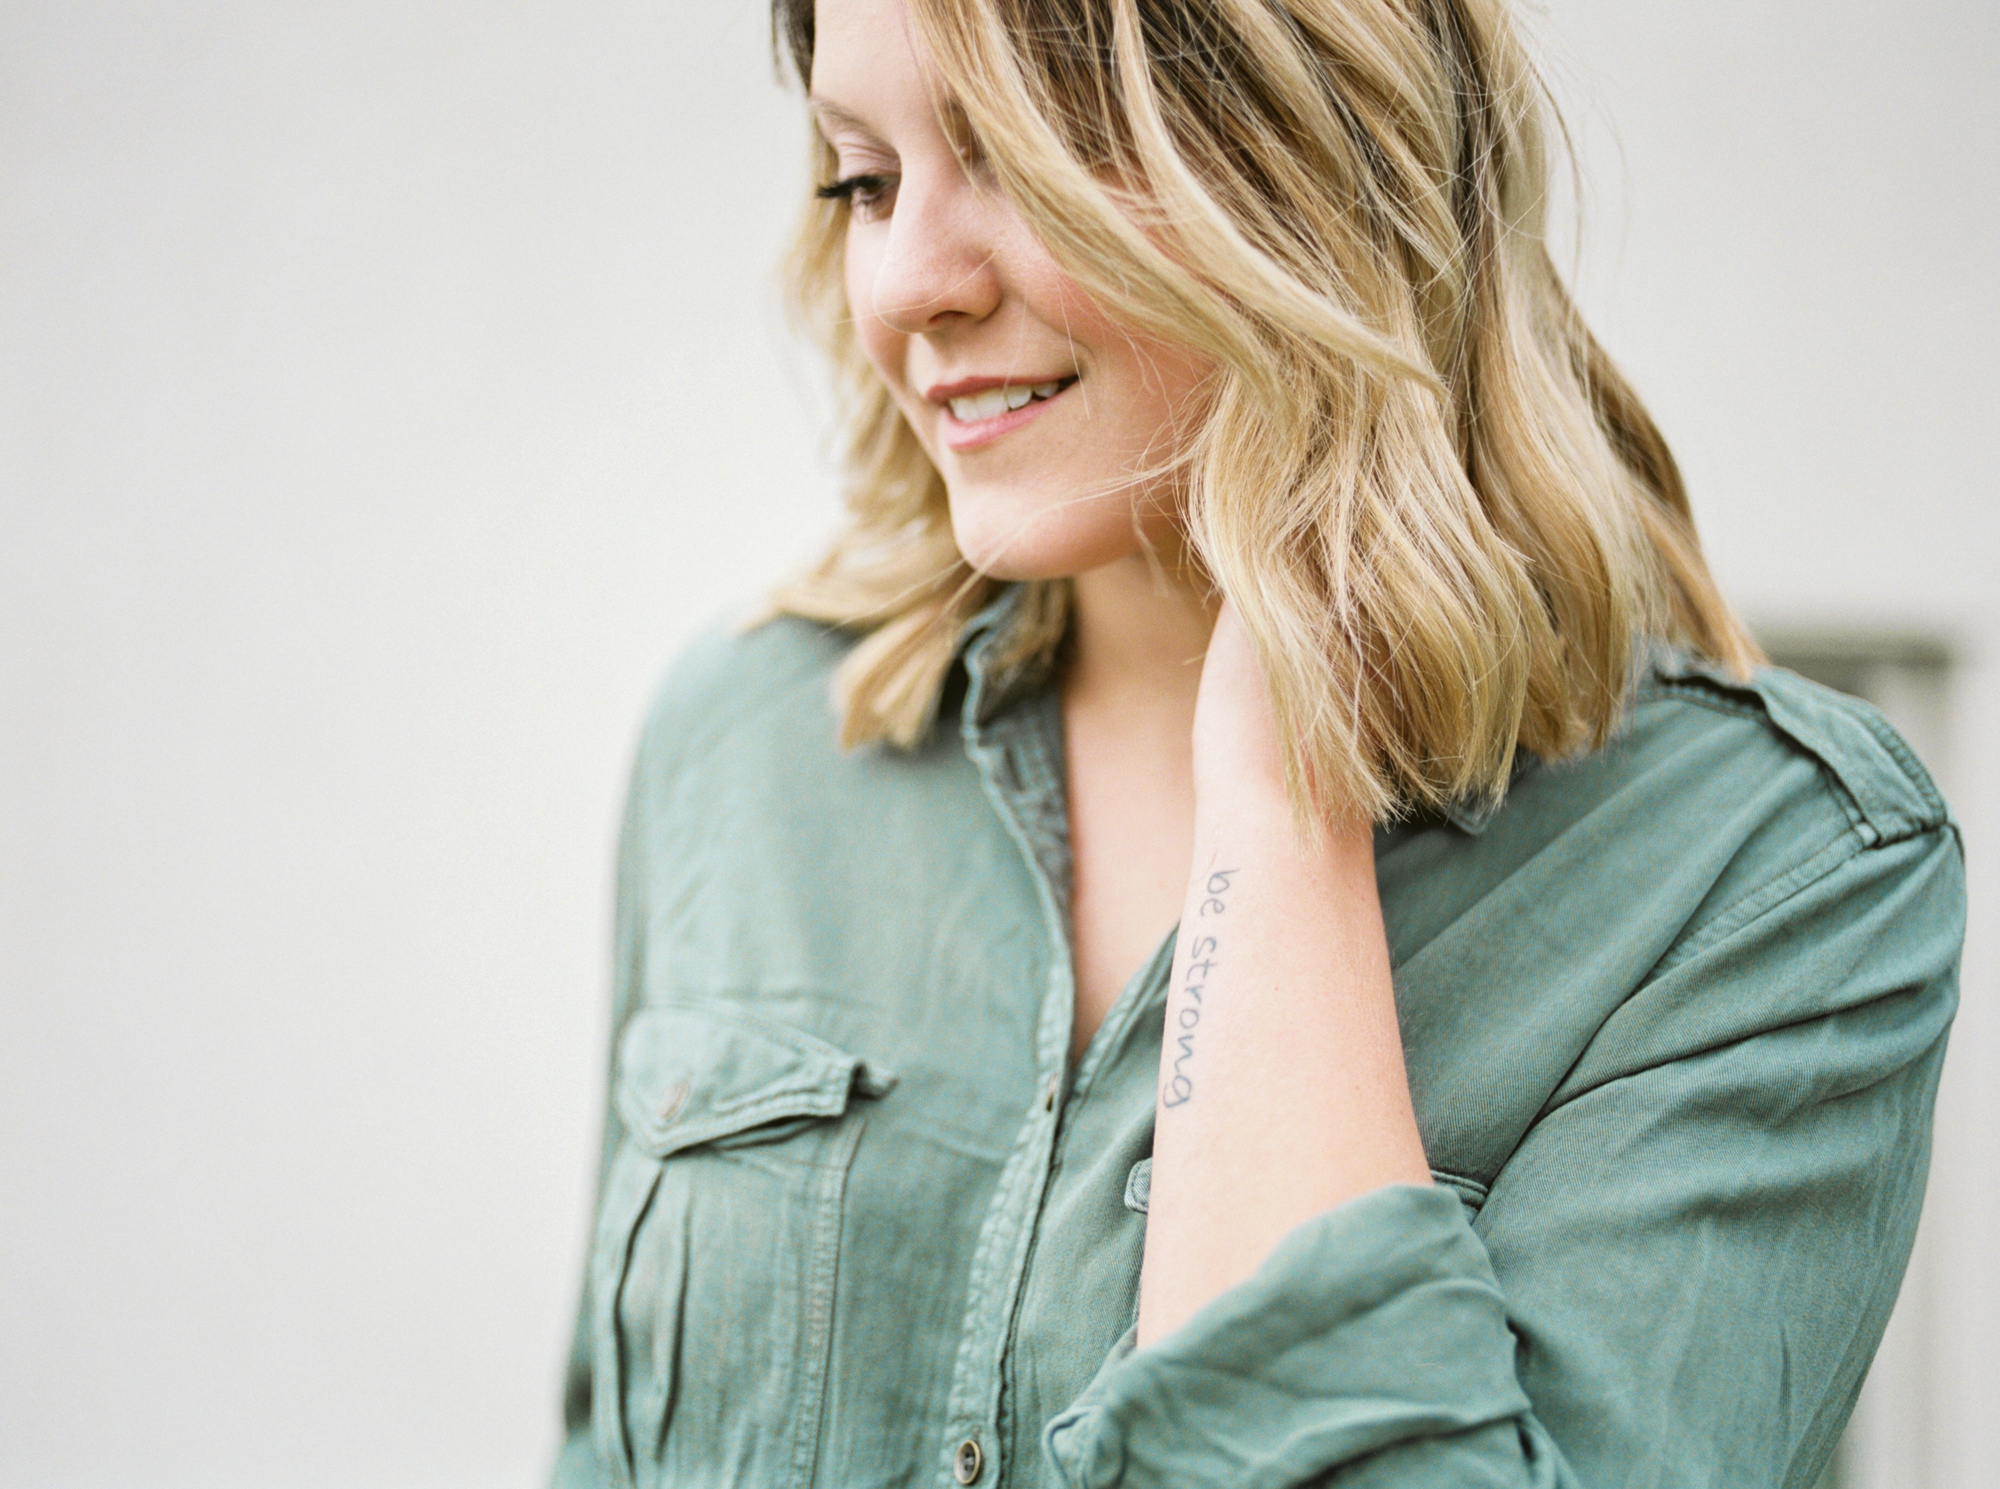 An interview with Jillian Falconer of Glow.Hair and Beauty, Niagara wedding hair and makeup artist, as a part of Kayla Yestal's Wedding Vendor Wednesday.